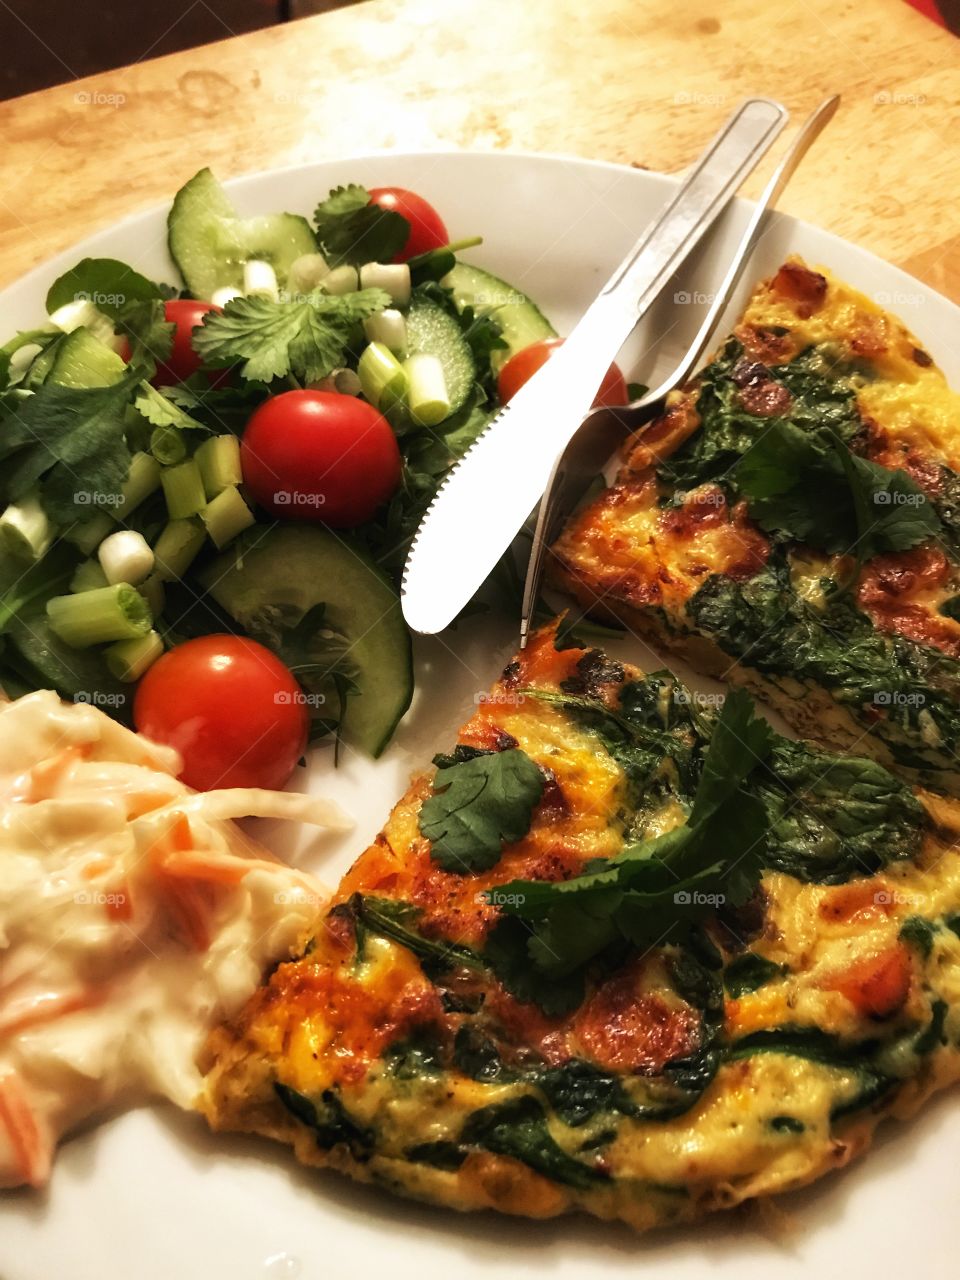 Spinach and sweet potato frittata with salad and coleslaw 